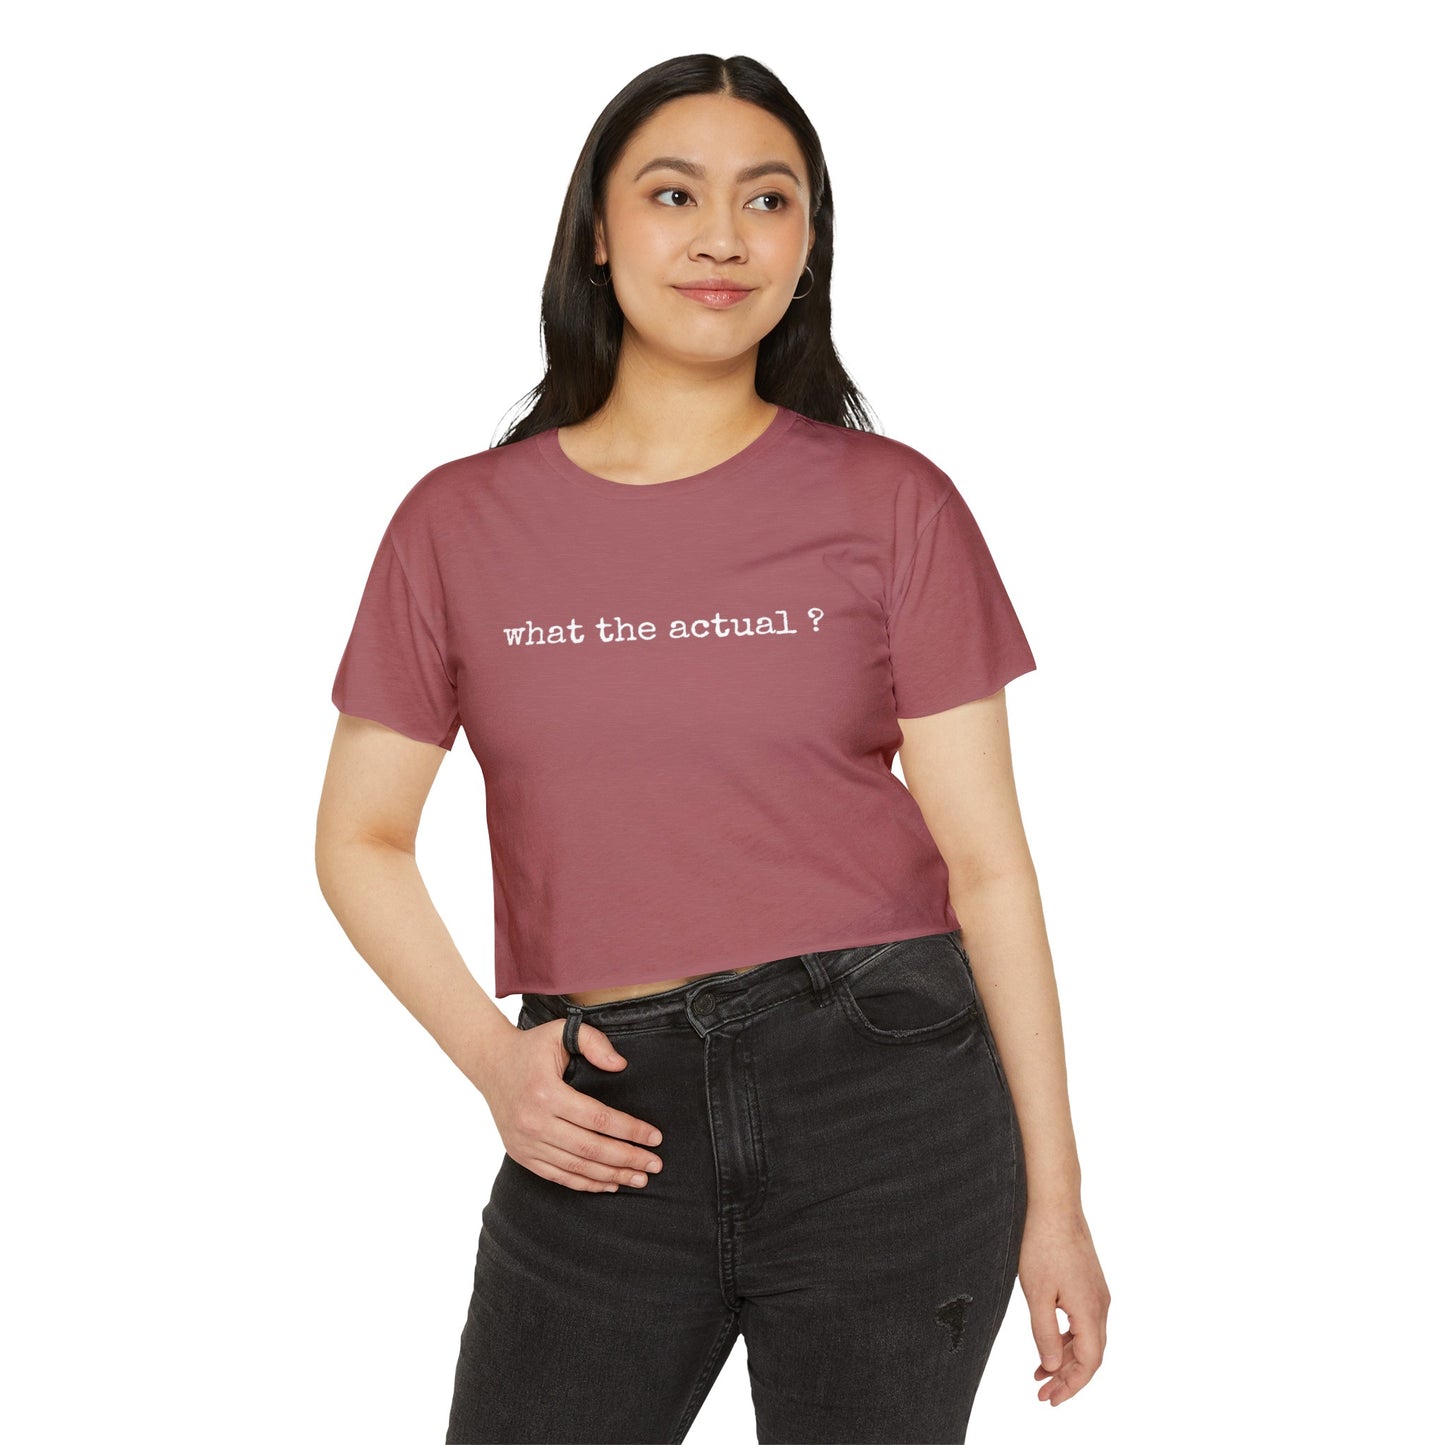 What the actual ? Cropped Tee